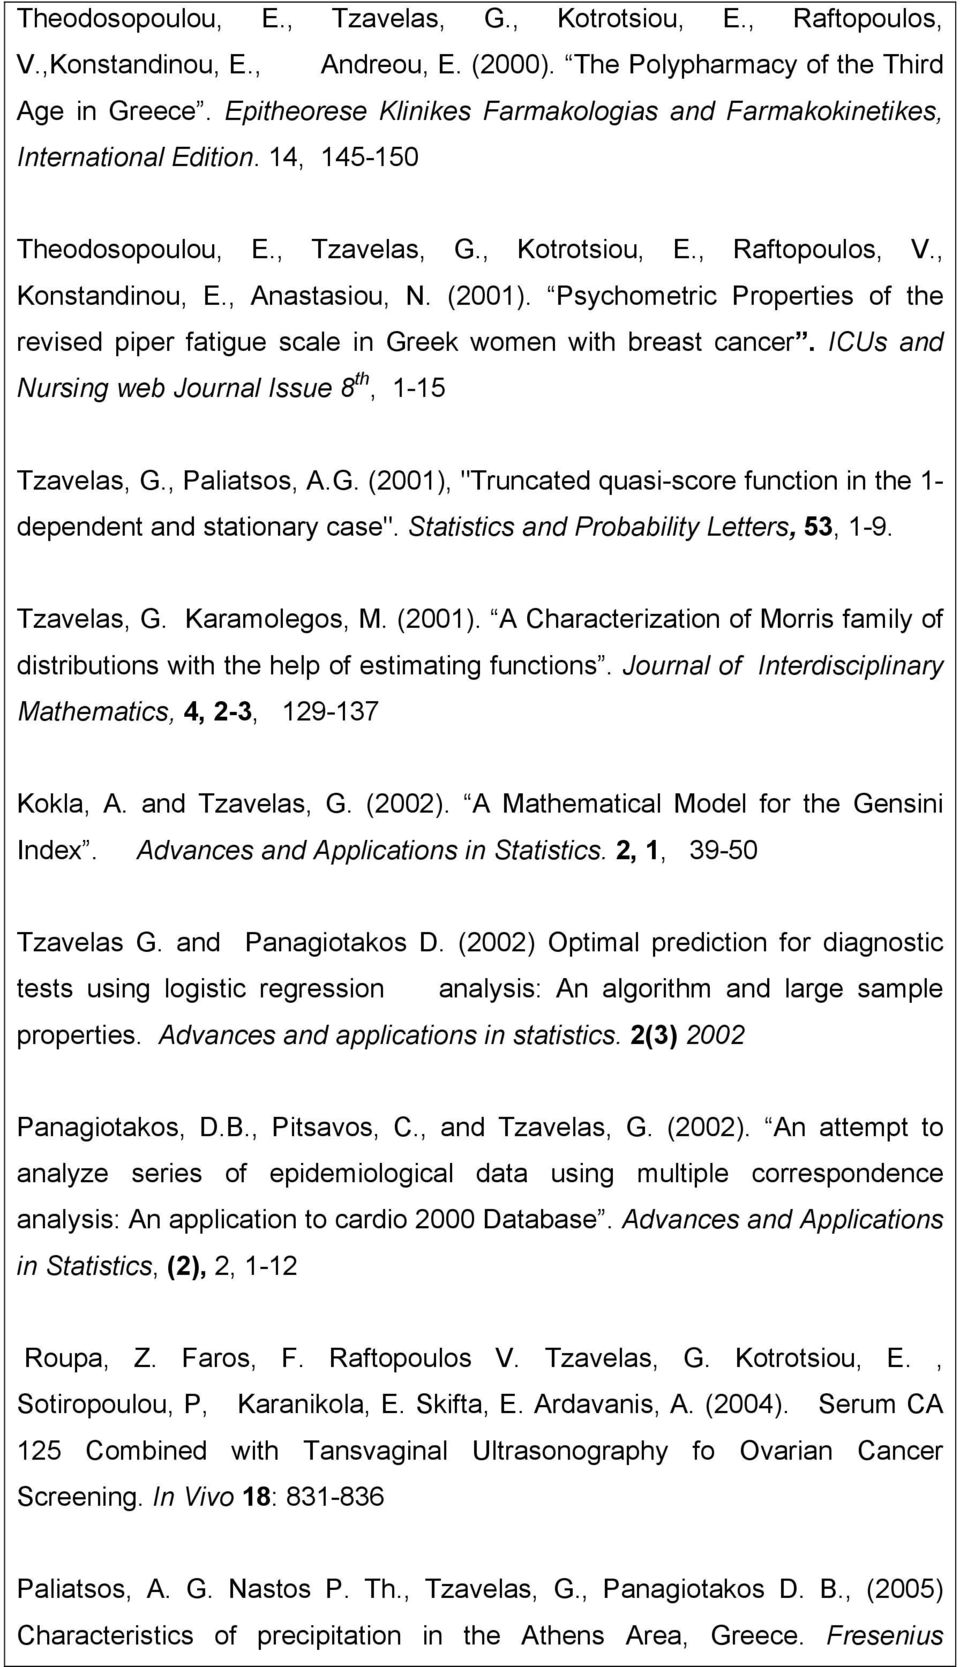 Psychometric Properties of the revised piper fatigue scale in Greek women with breast cancer. ICUs and Nursing web Journal Issue 8 th, 1-15 Tzavelas, G., Paliatsos, A.G. (2001), "Truncated quasi-score function in the 1- dependent and stationary case".